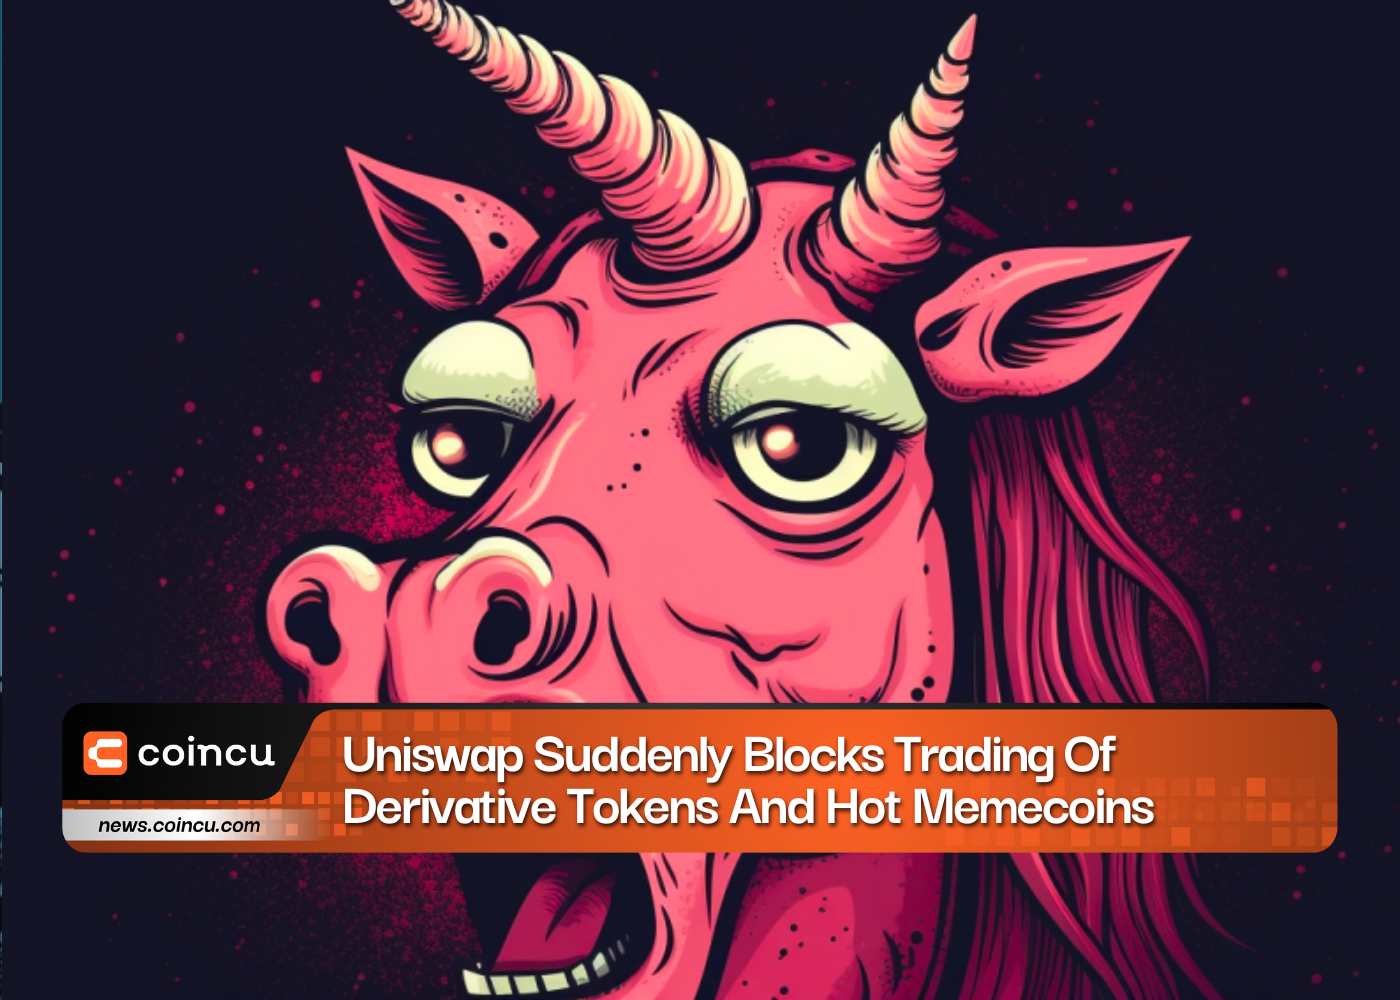 Uniswap Suddenly Blocks Trading Of Derivative Tokens And Hot Memecoins